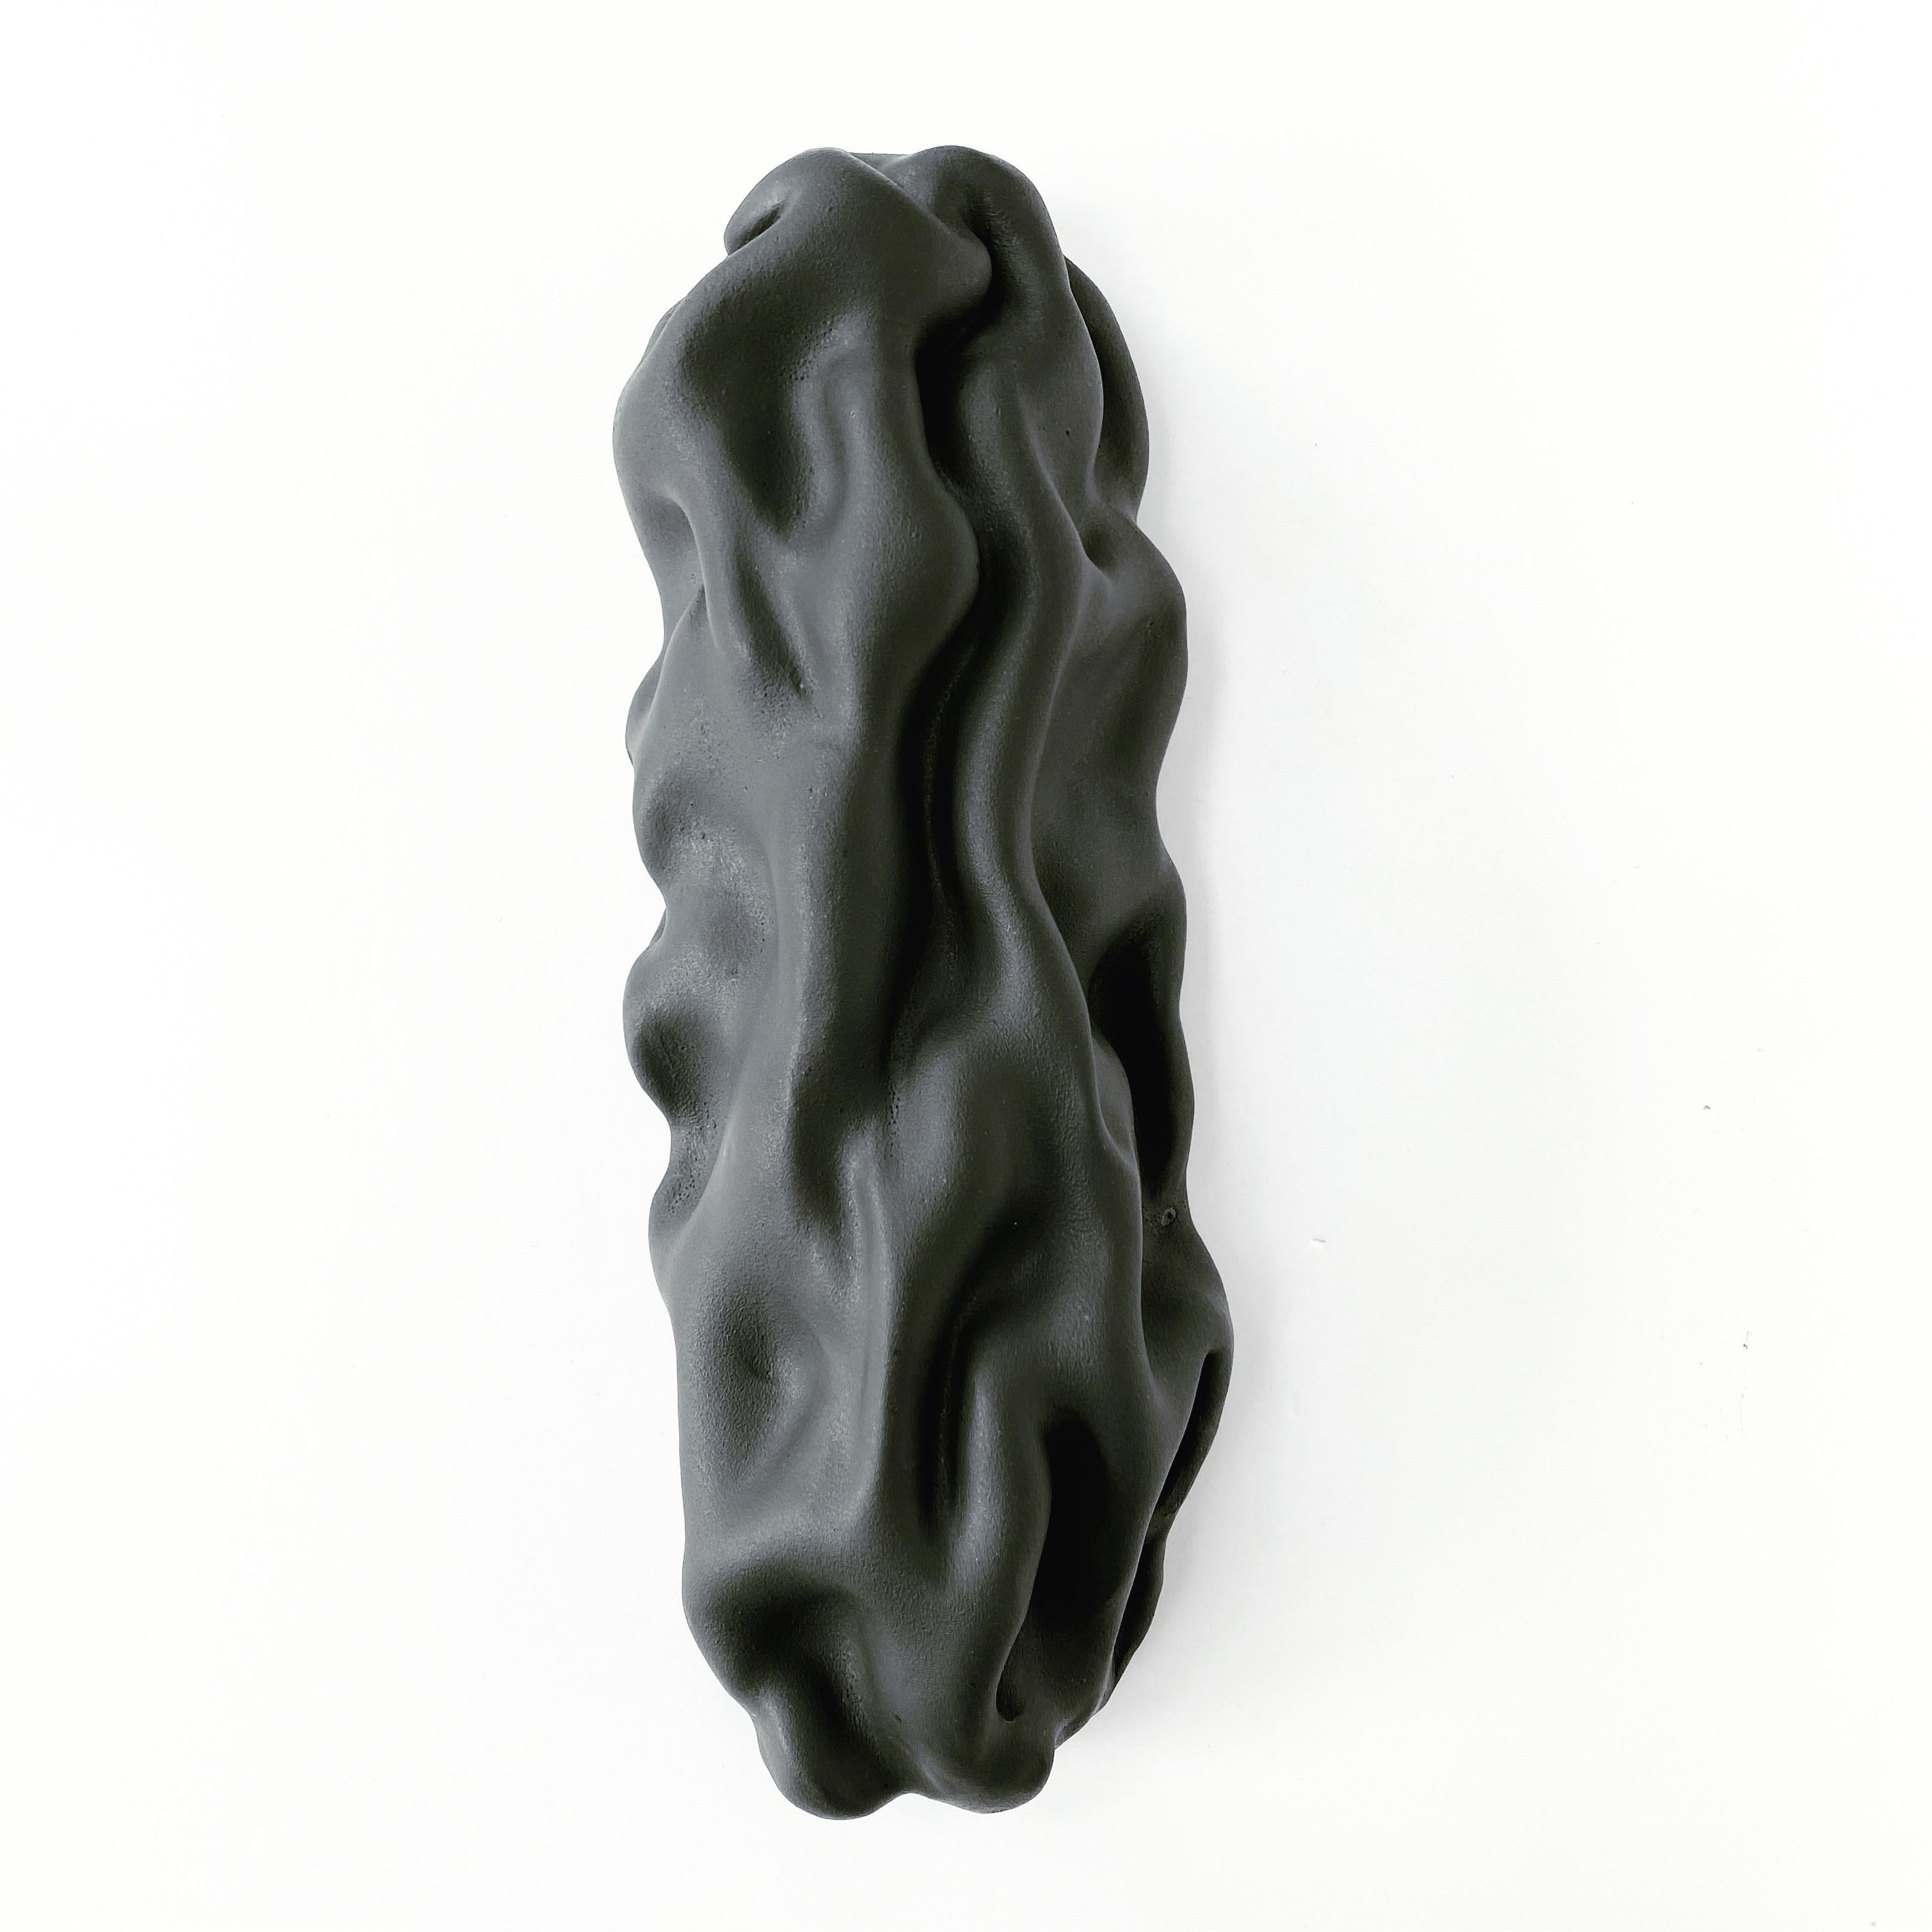 Emboss wall sculpture II by Sophie Rogers
Dimensions: D 8 x W 12 x H 32 cm
Materials: Ceramic, glaze
Other glaze colors available.

Wall sculpture with undulating shape like a draped piece of cloth. Changes expression depending on the light